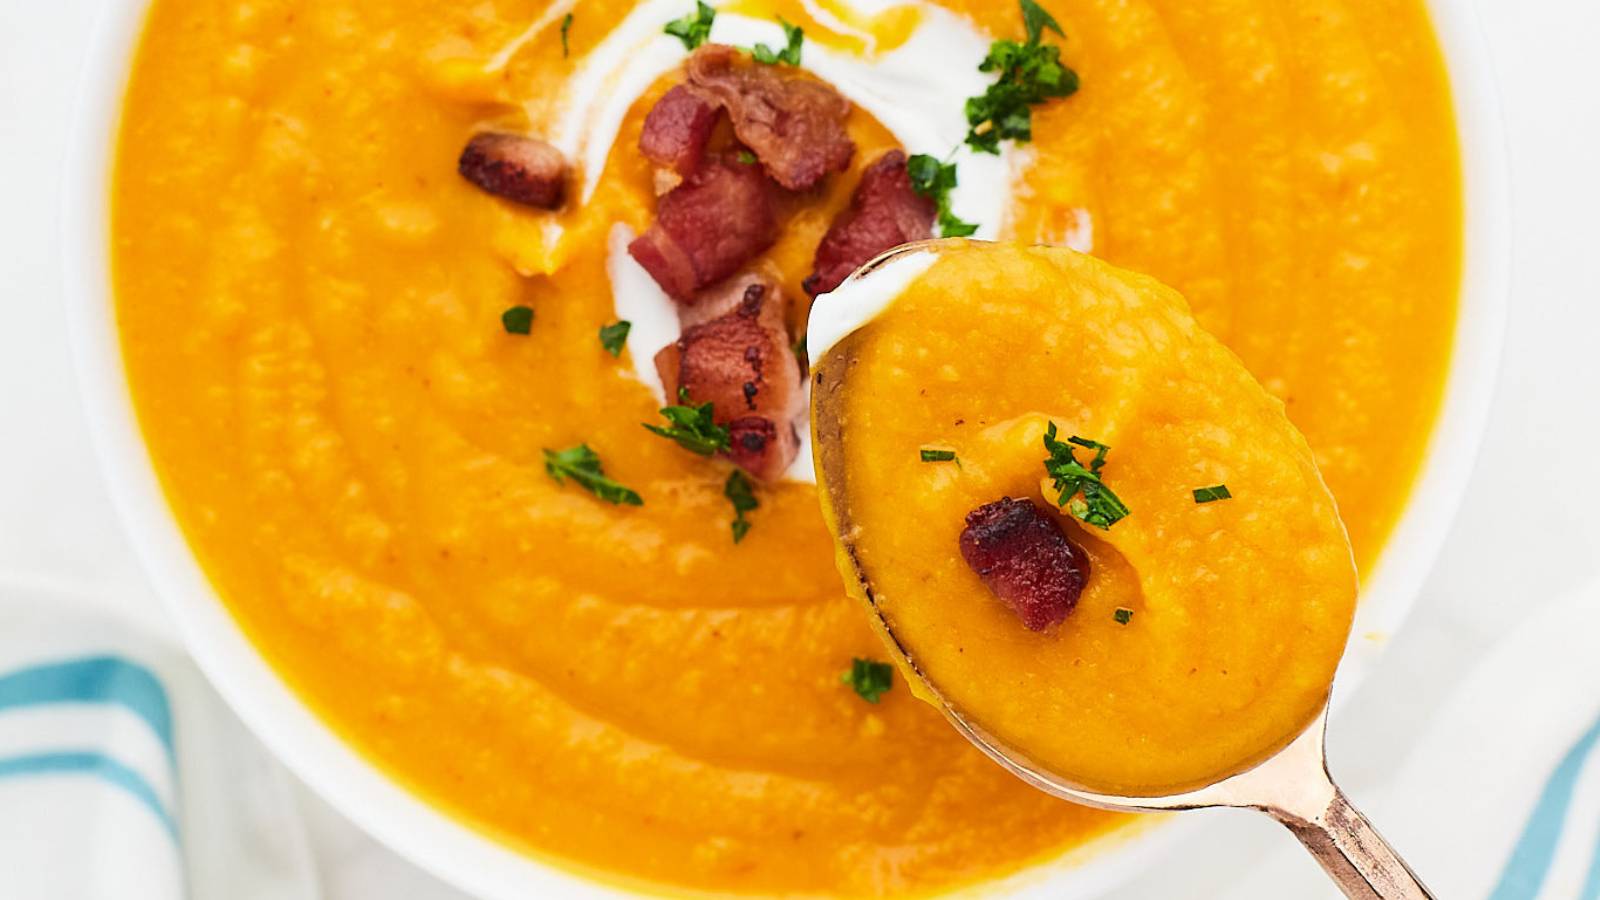 Sweet Potato Soup recipe by Cheerful Cook.